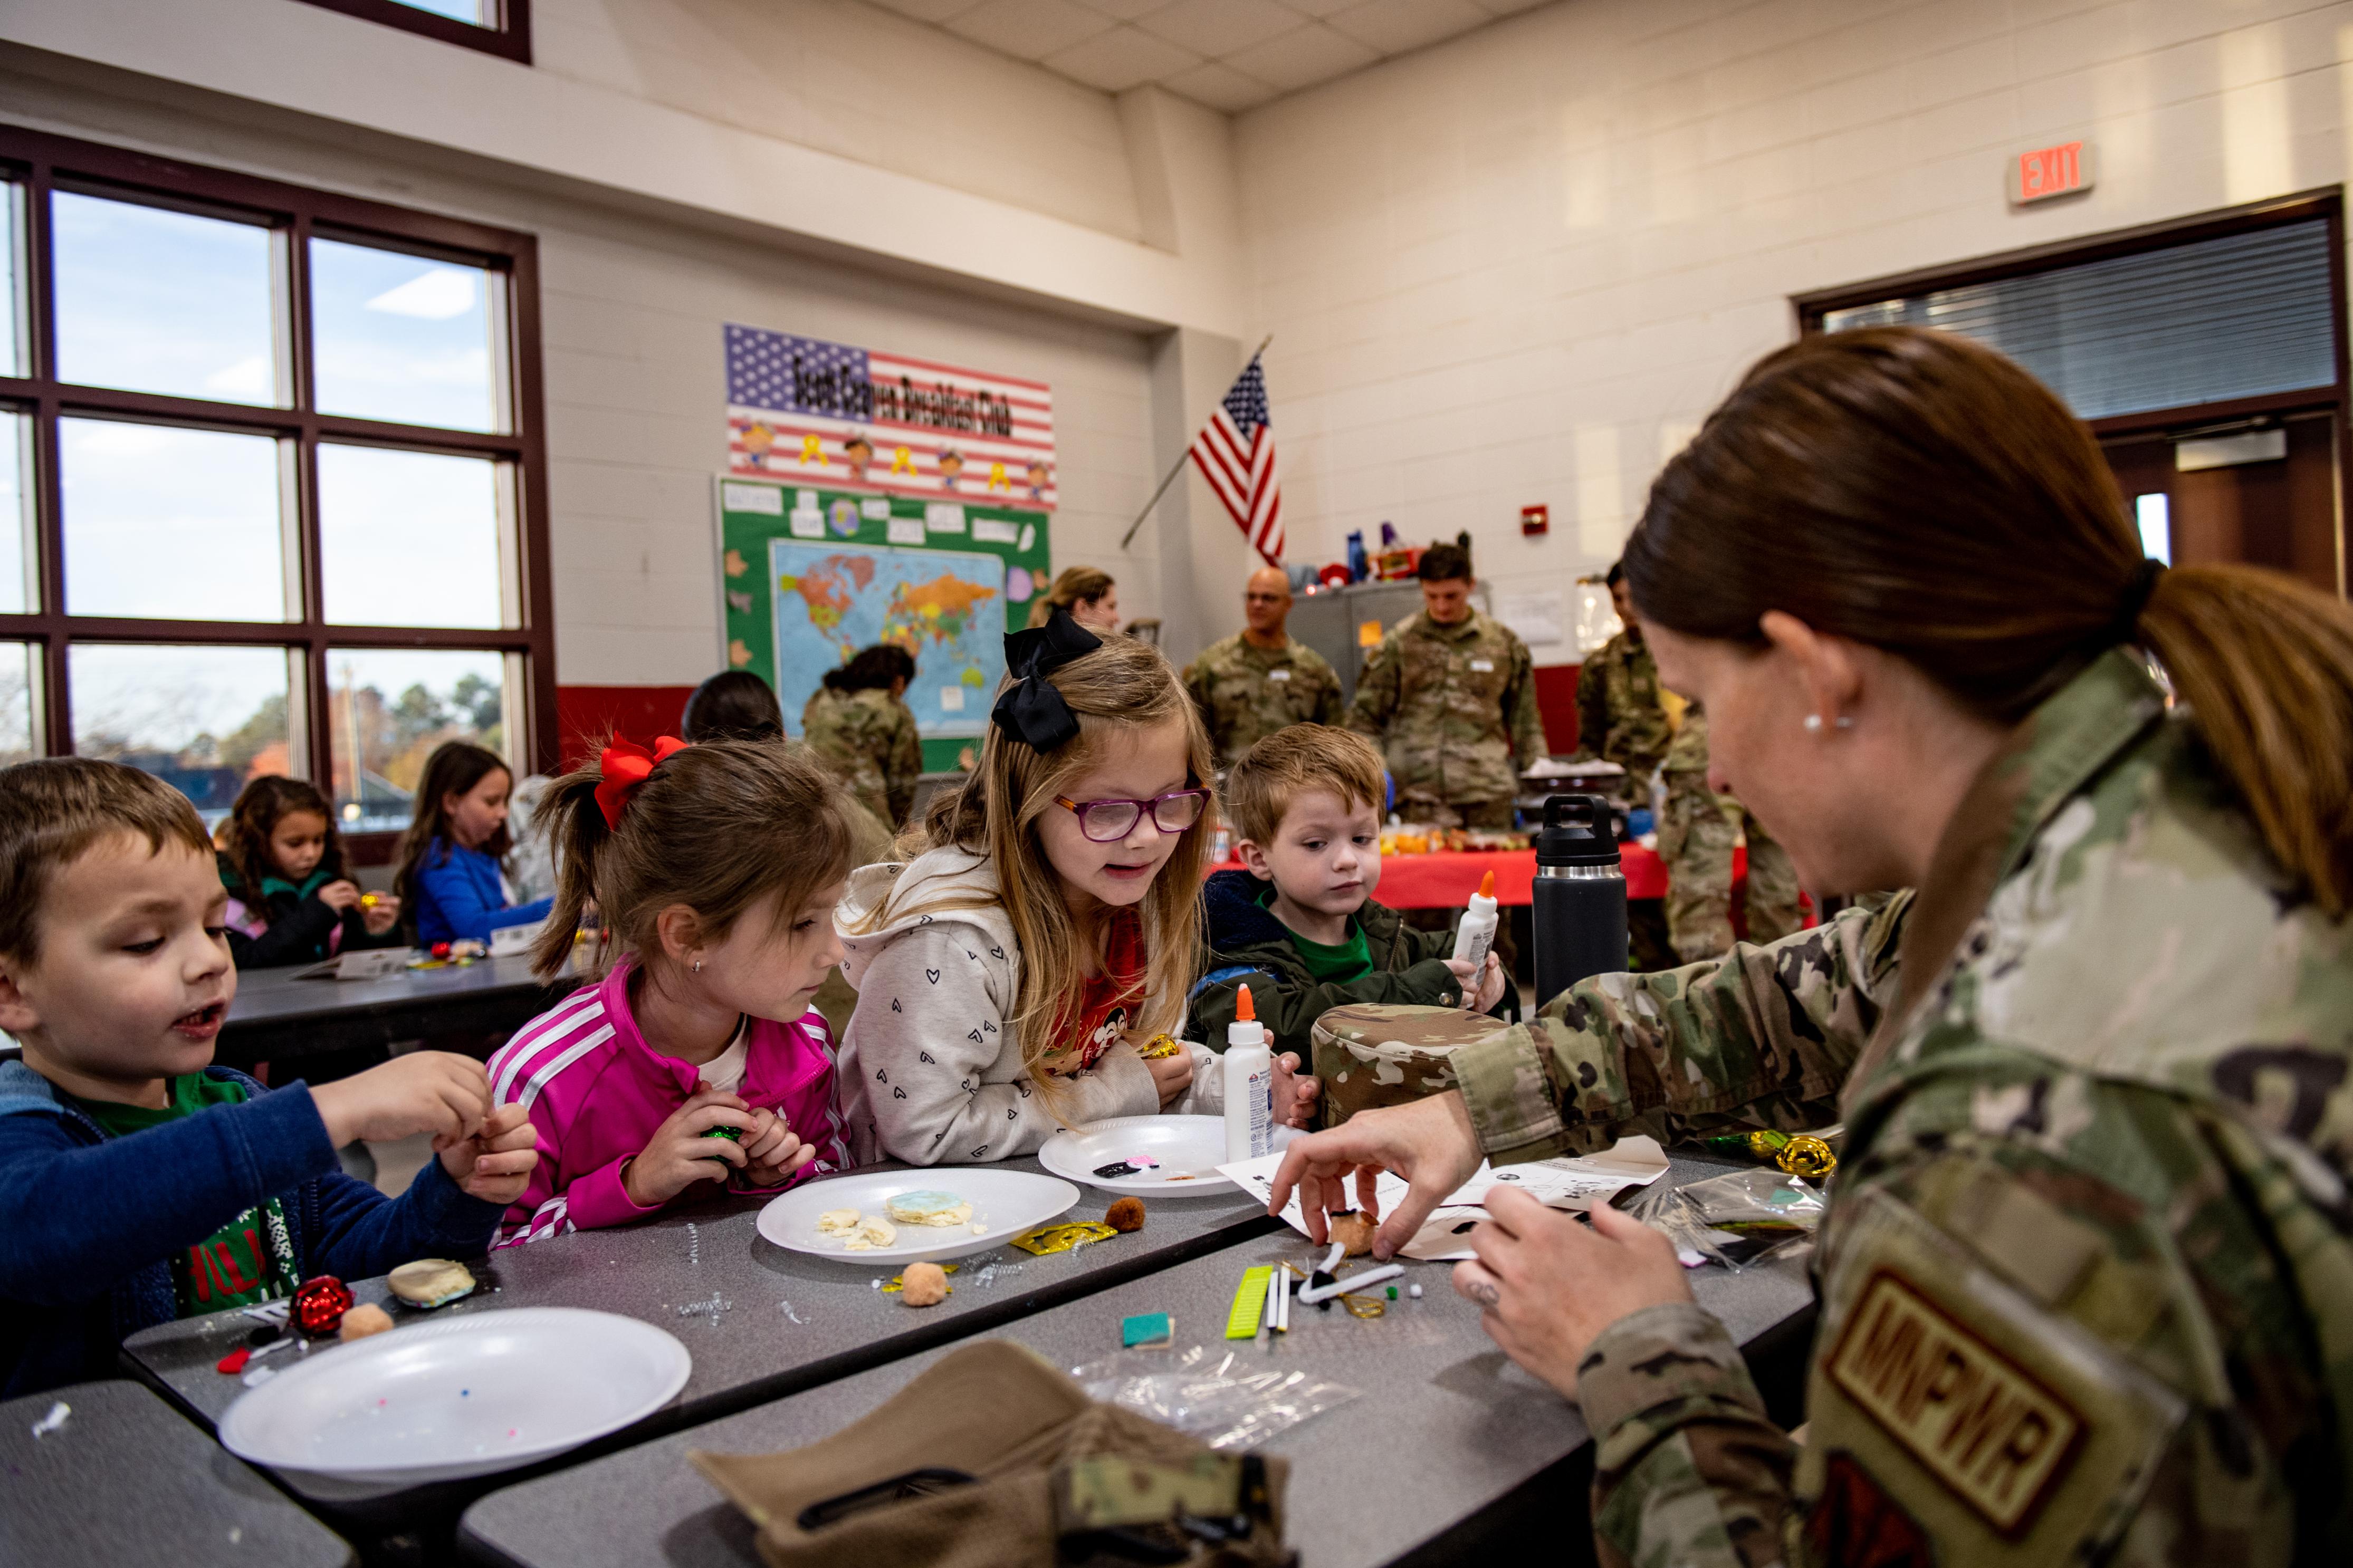 A U.S. Air Force Airman assigned to the 23rd Wing at Moody Air Force Base, Georgia, shows students how to put together a holiday ornament at James L. Dewar Elementary School in Valdosta, Georgia, Dec. 15, 2023. Once a month, Dewar Elementary hosts the Deployment Breakfast Club for students with a deployed parent. (U.S. Air Force photo by Senior Airman Courtney Sebastianelli)